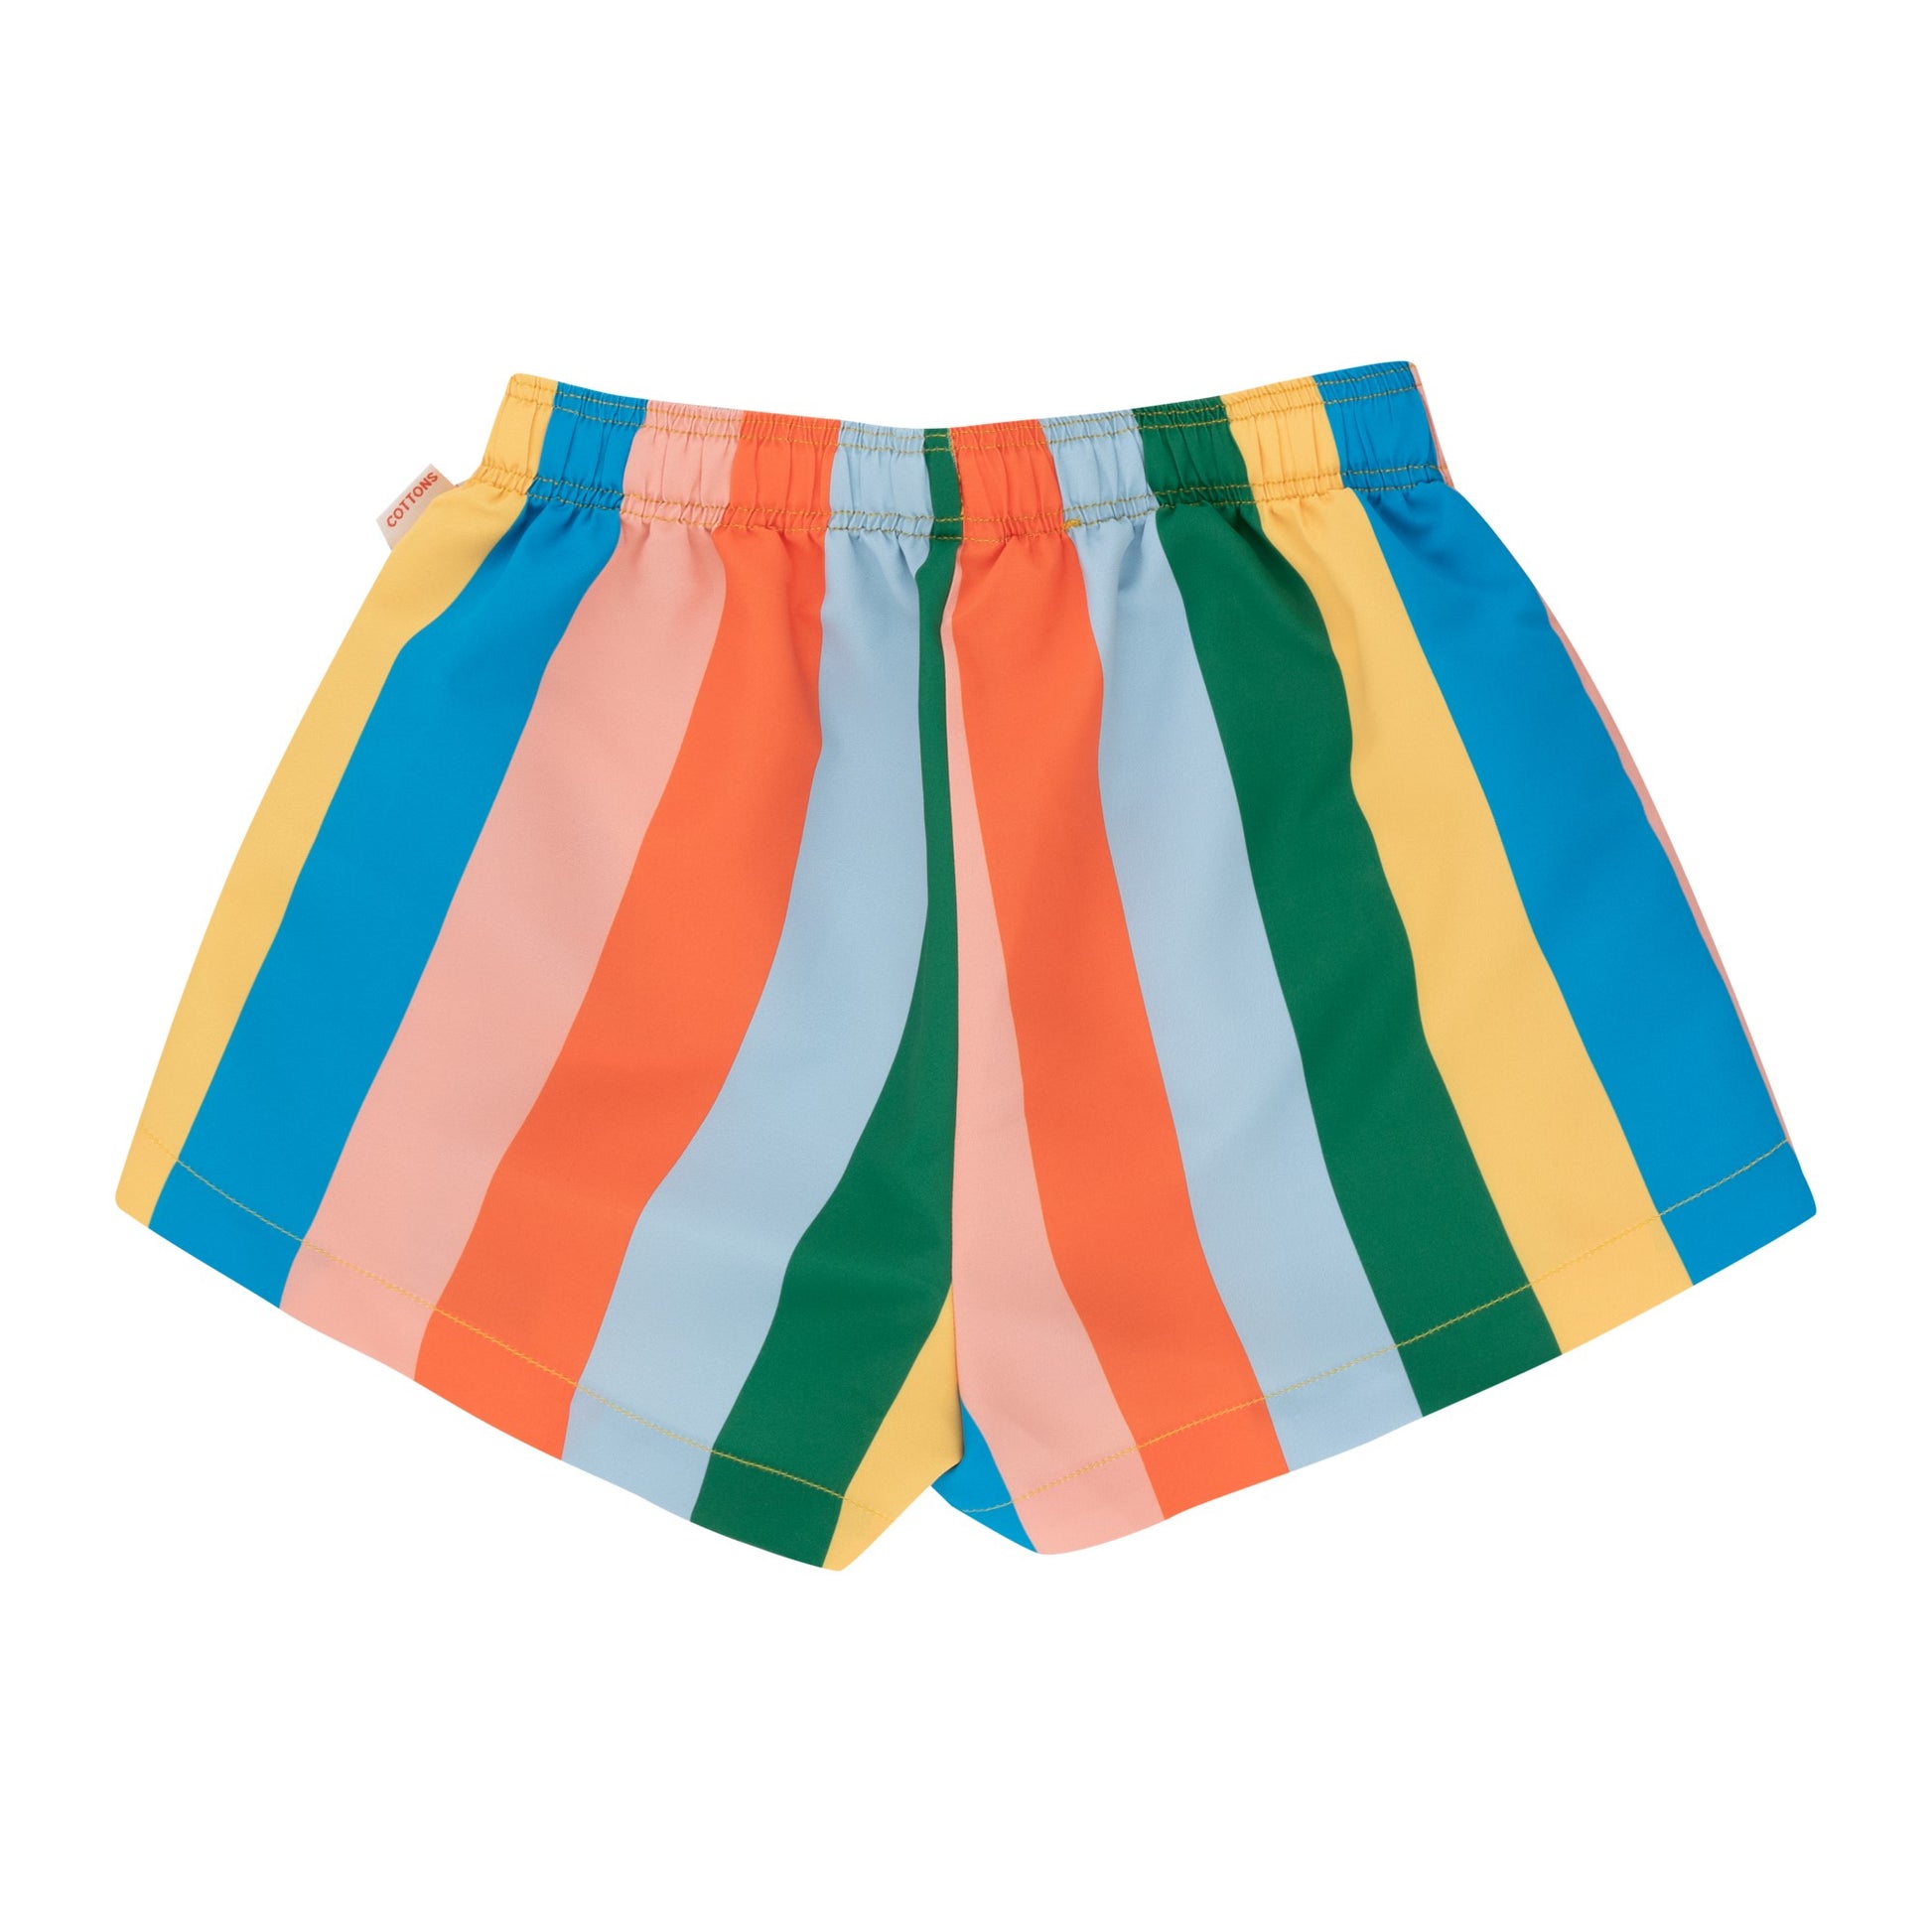 TINYCOTTONS Multicolor Stripes Trunks ALWAYS SHOW